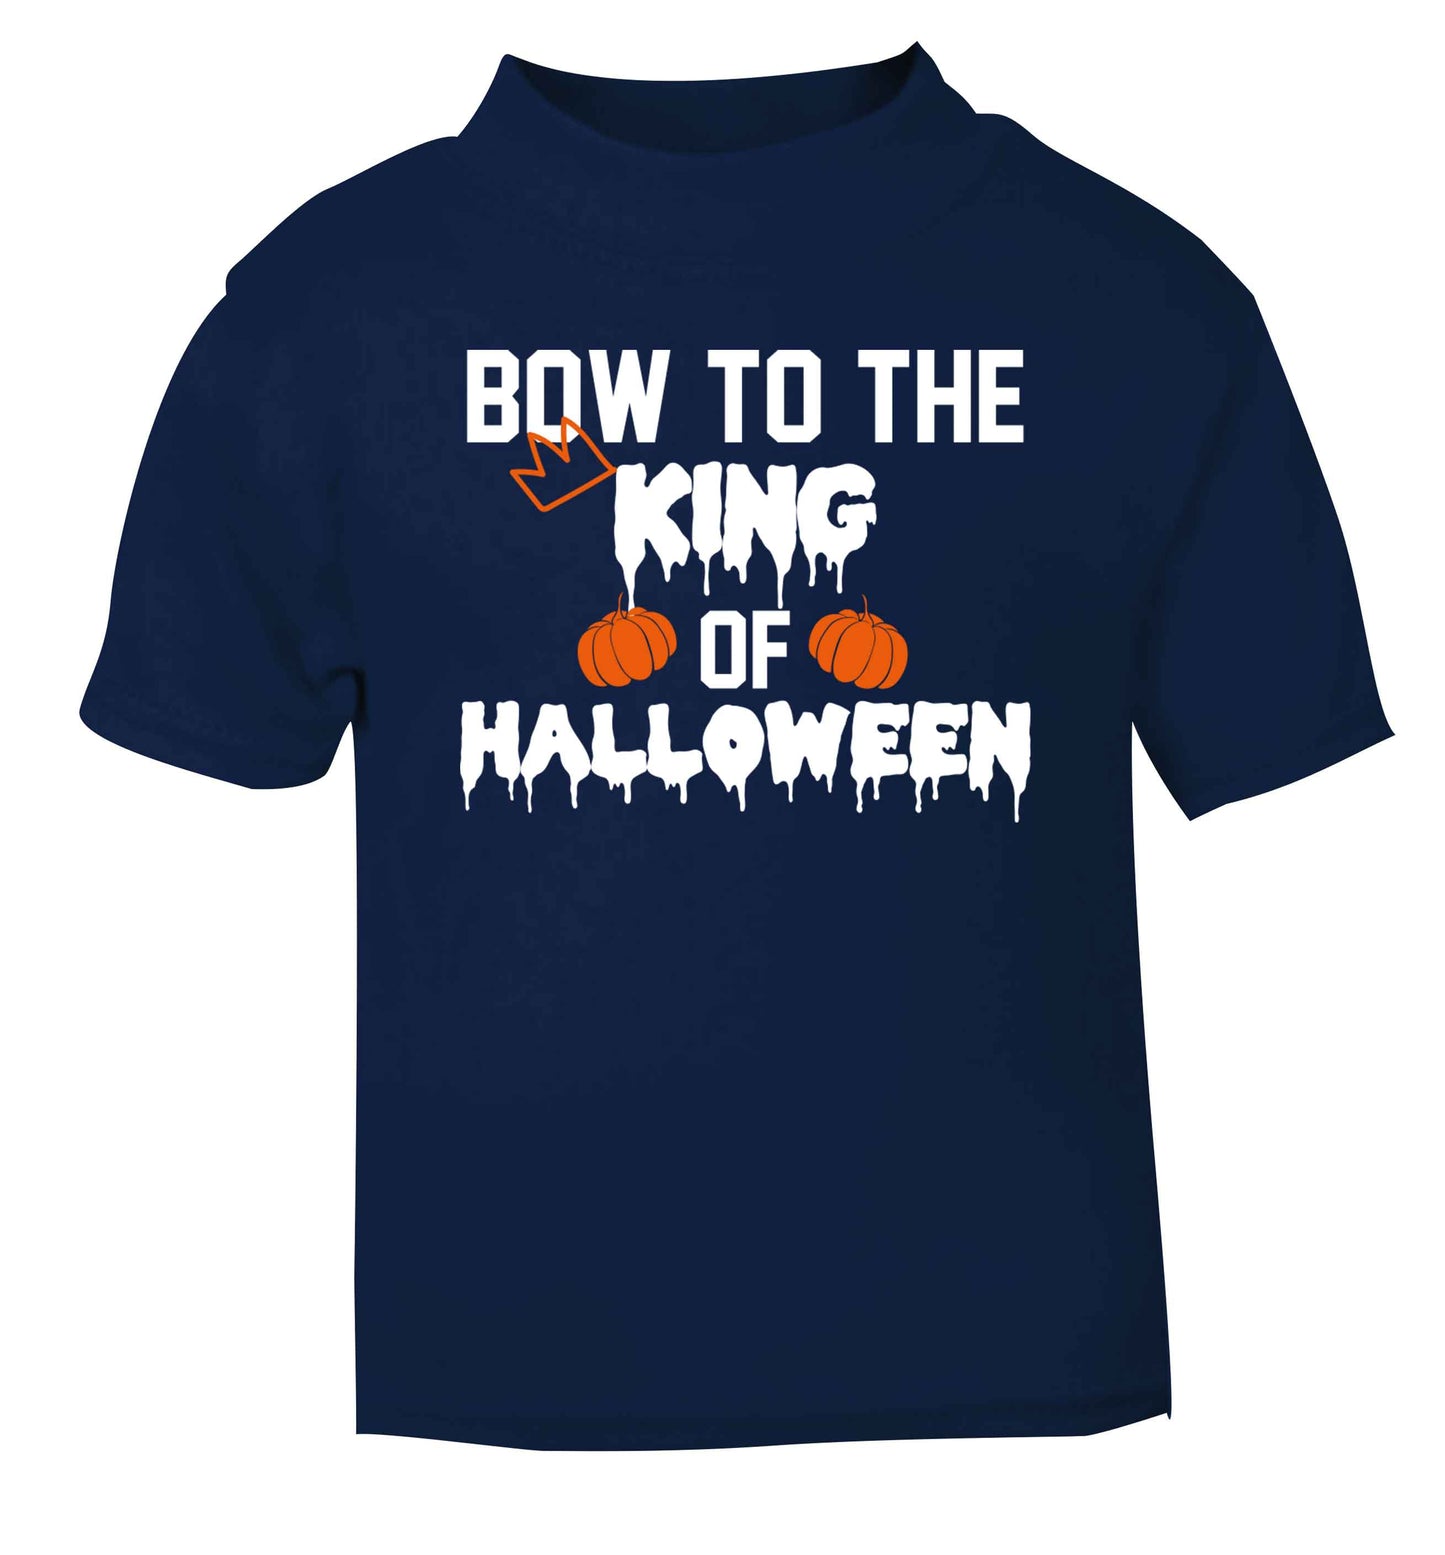 Bow to the King of halloween navy baby toddler Tshirt 2 Years